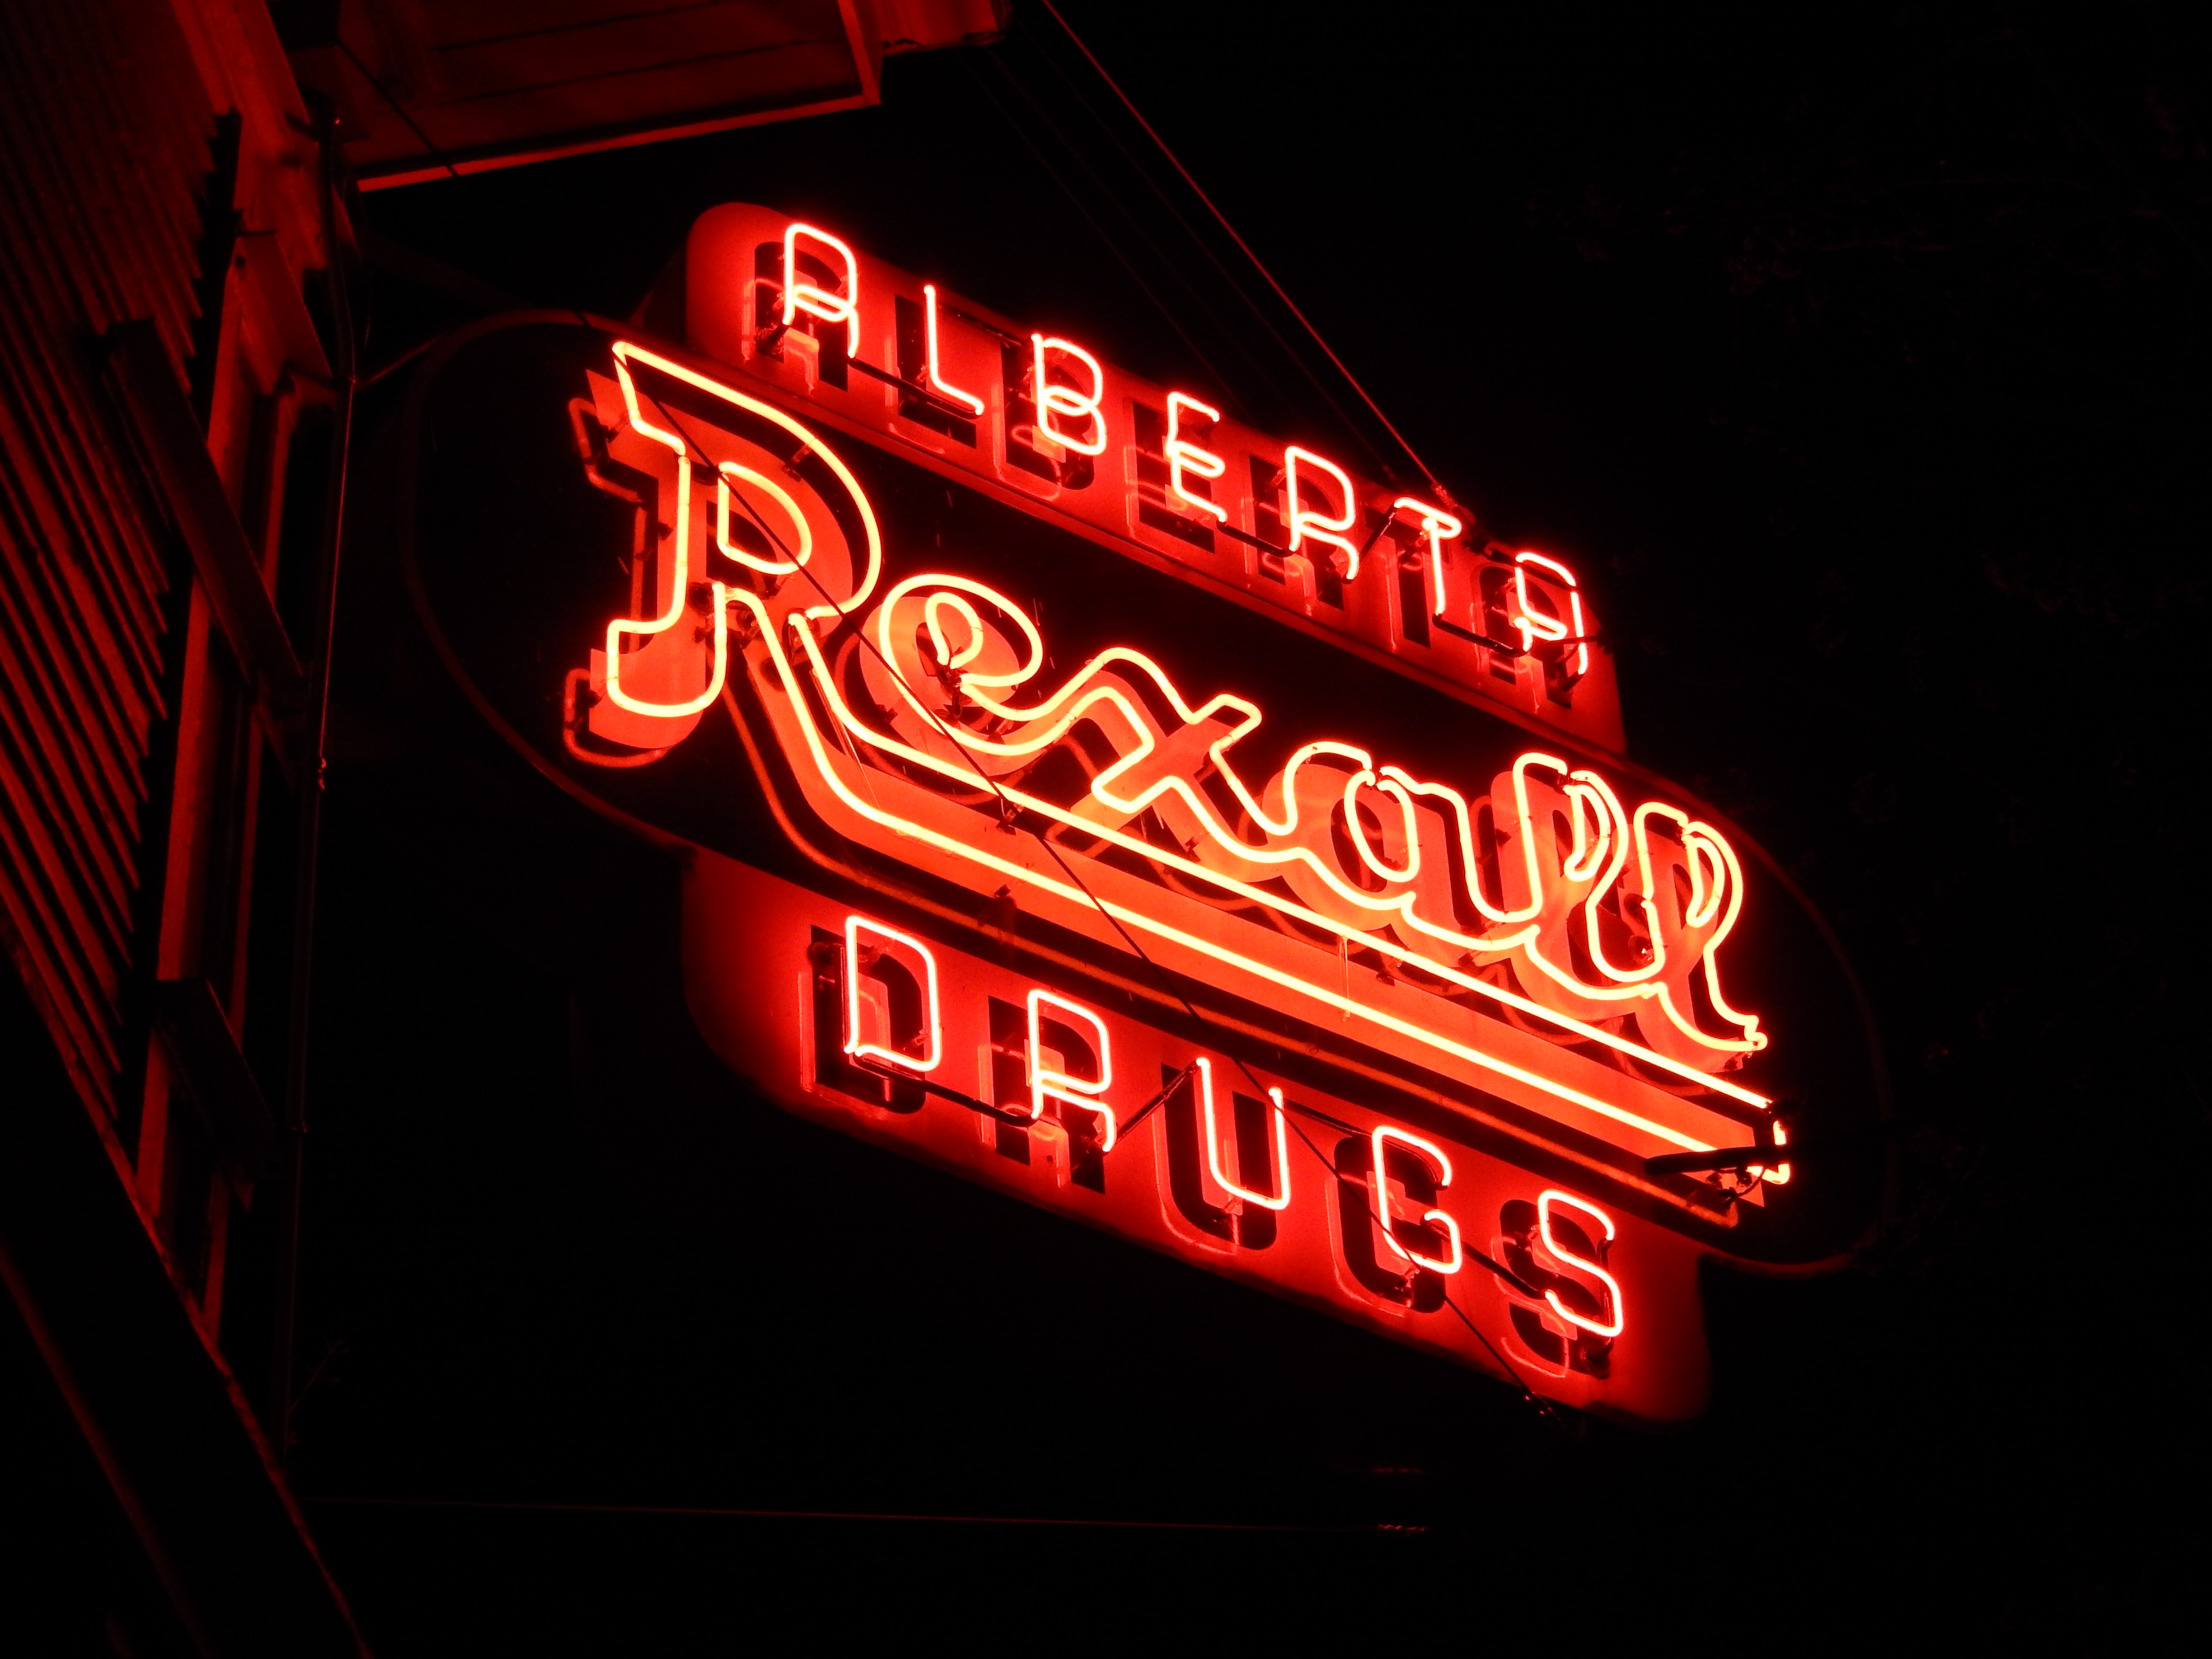 The Alberta Arts District's Rexall Drugs store sign was relit in ...